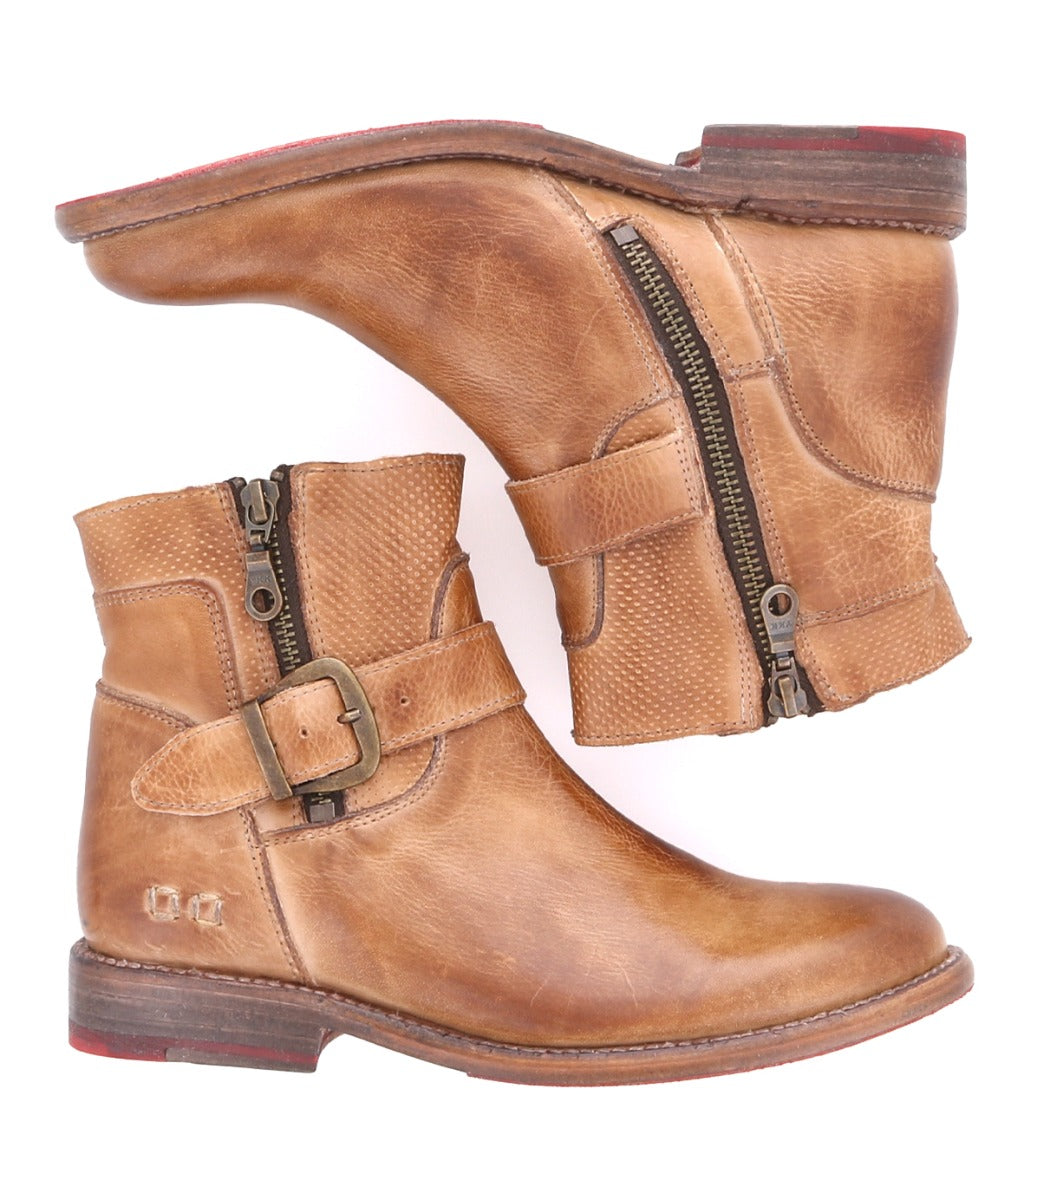 A pair of Becca tan leather ankle boots with zippers by Bed Stu.